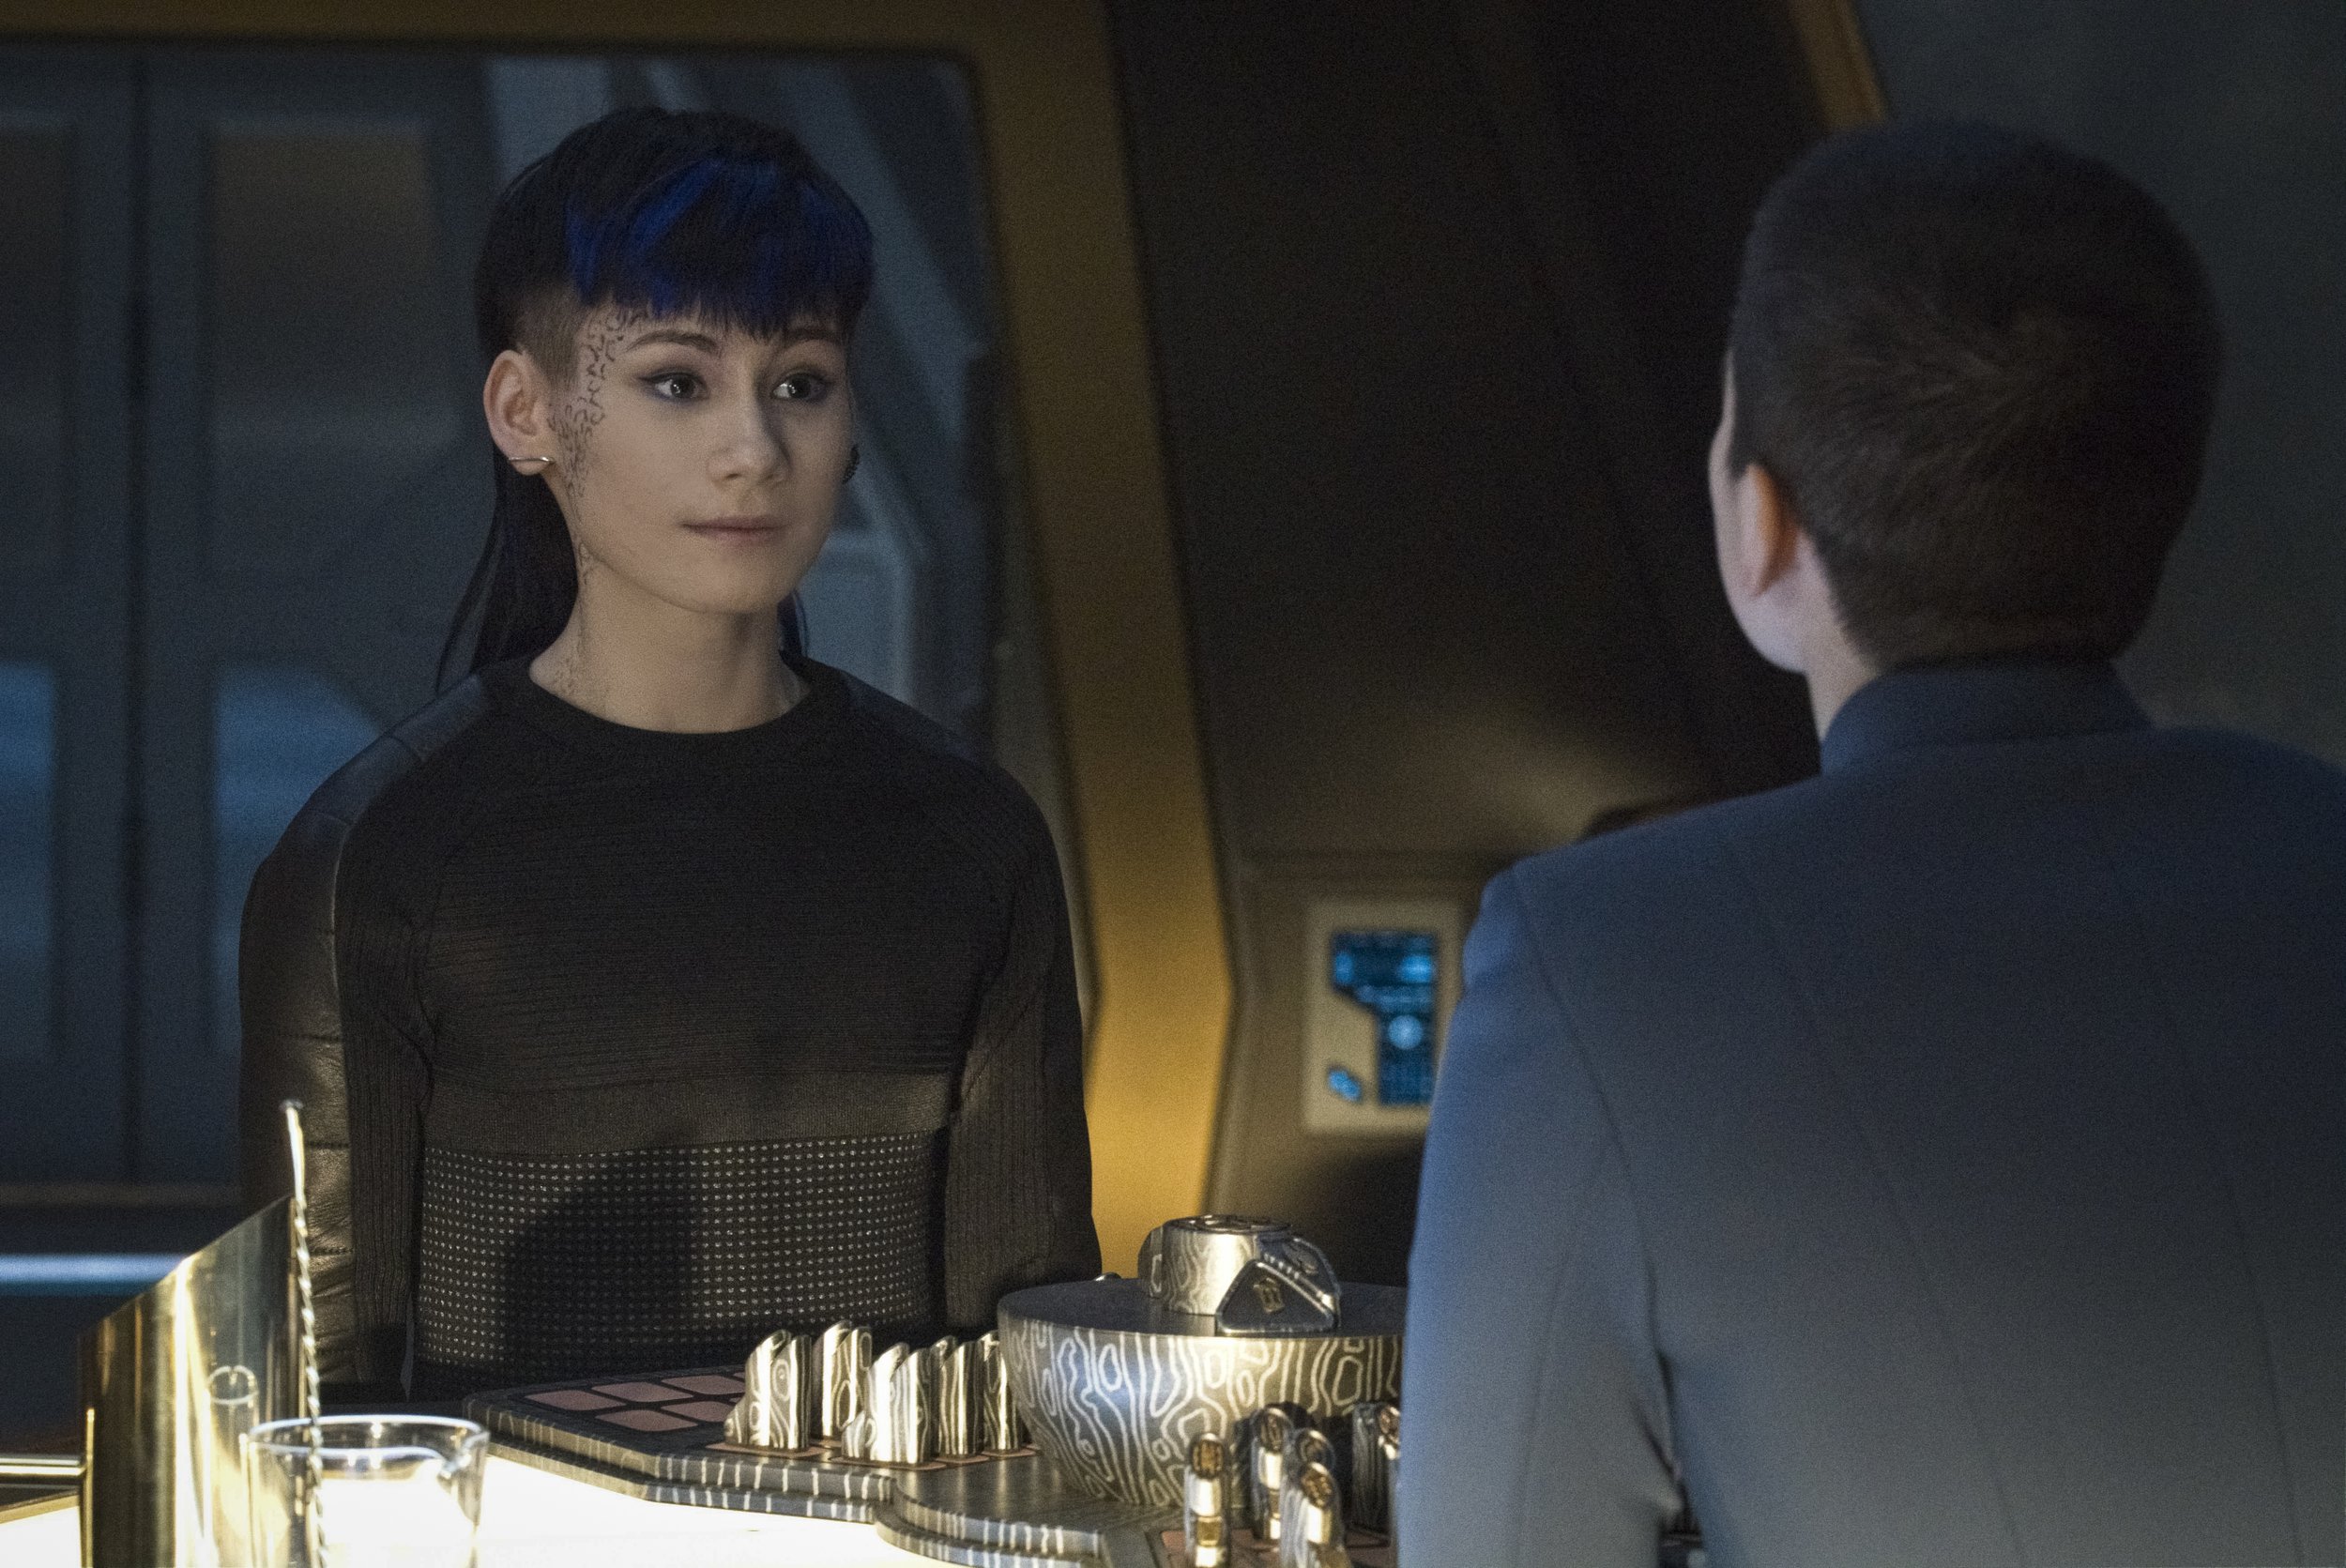   Pictured: Ian Alexander as Gray and Blu del Barrio as Adira of the Paramount+ original series STAR TREK: DISCOVERY. Photo Cr: Michael Gibson/Paramount+ (C) 2021 CBS Interactive. All Rights Reserved.  